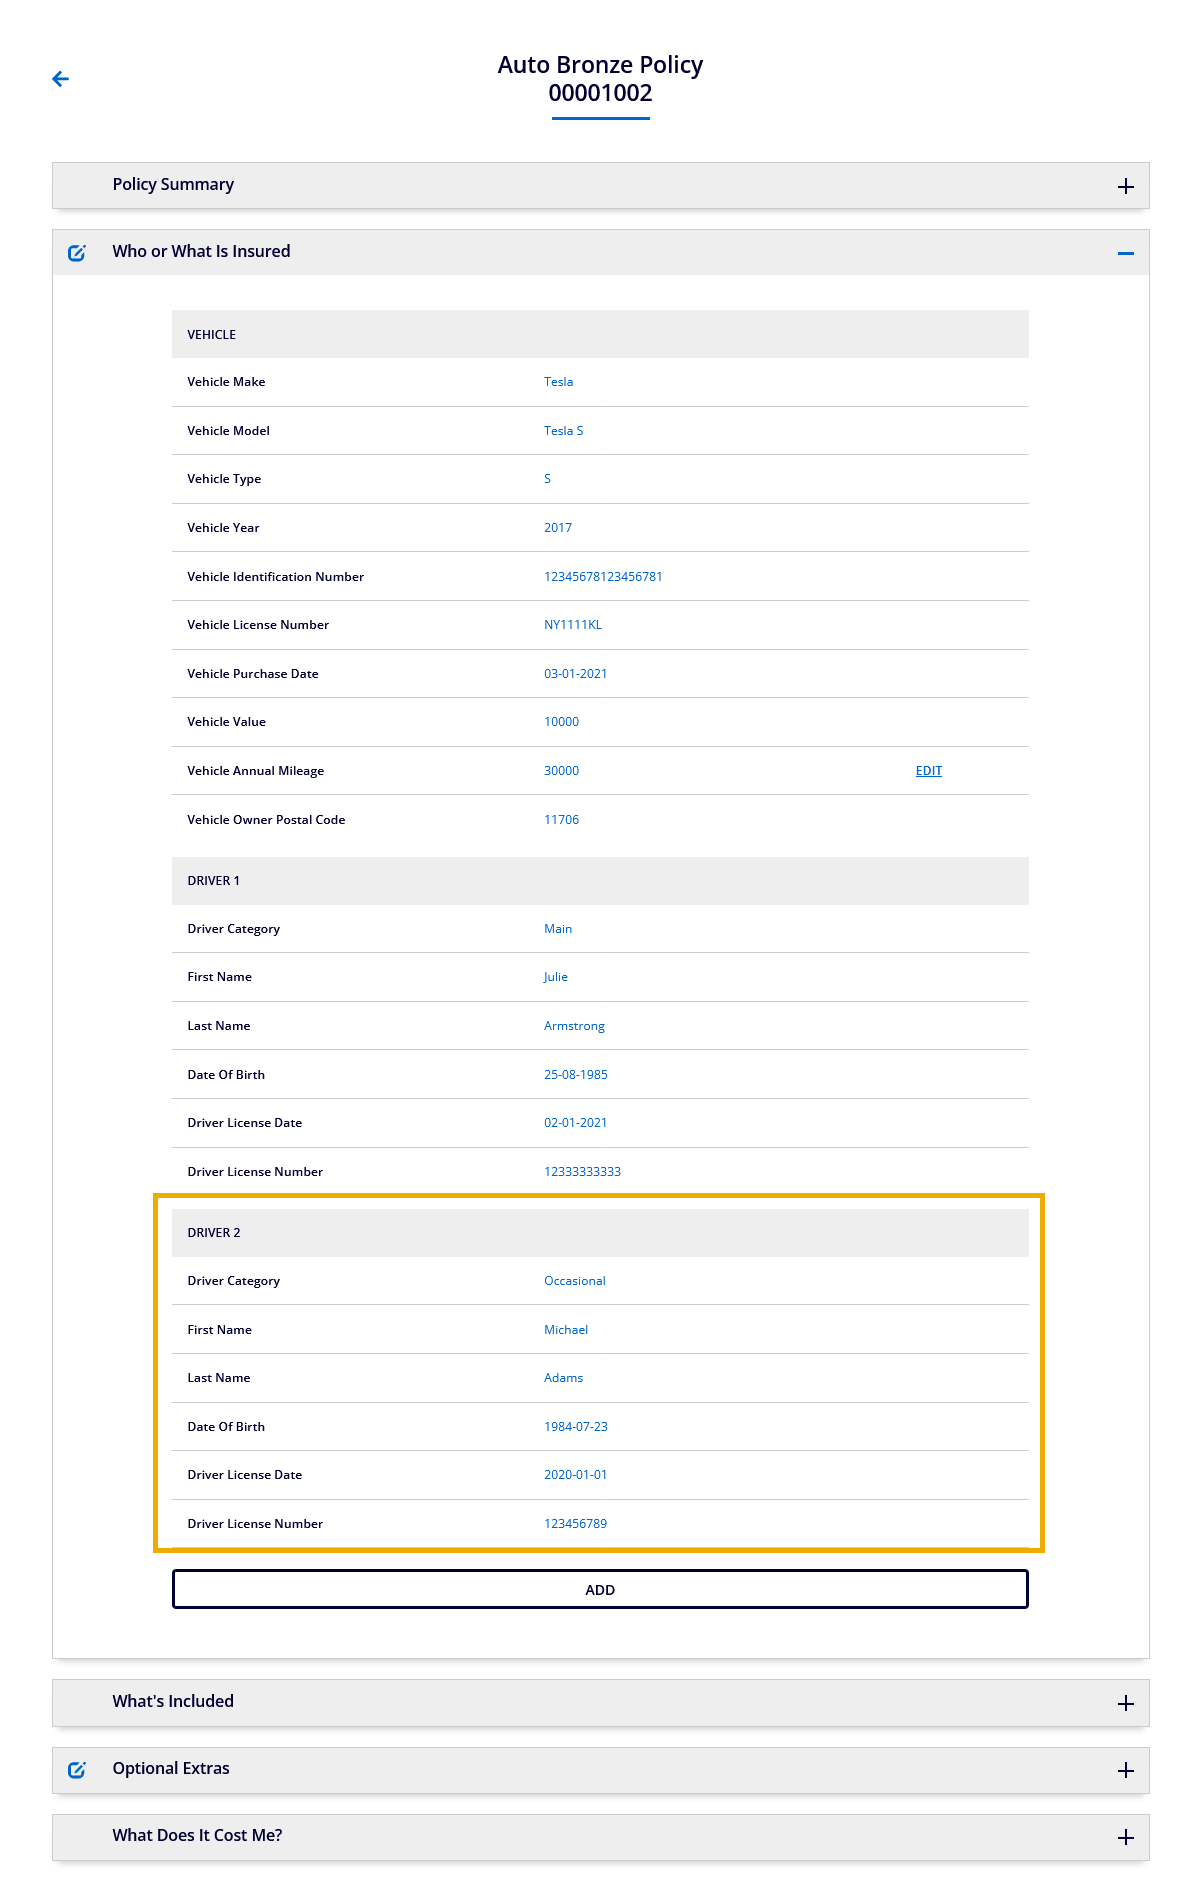 Policy Details Page with Additional Driver Added